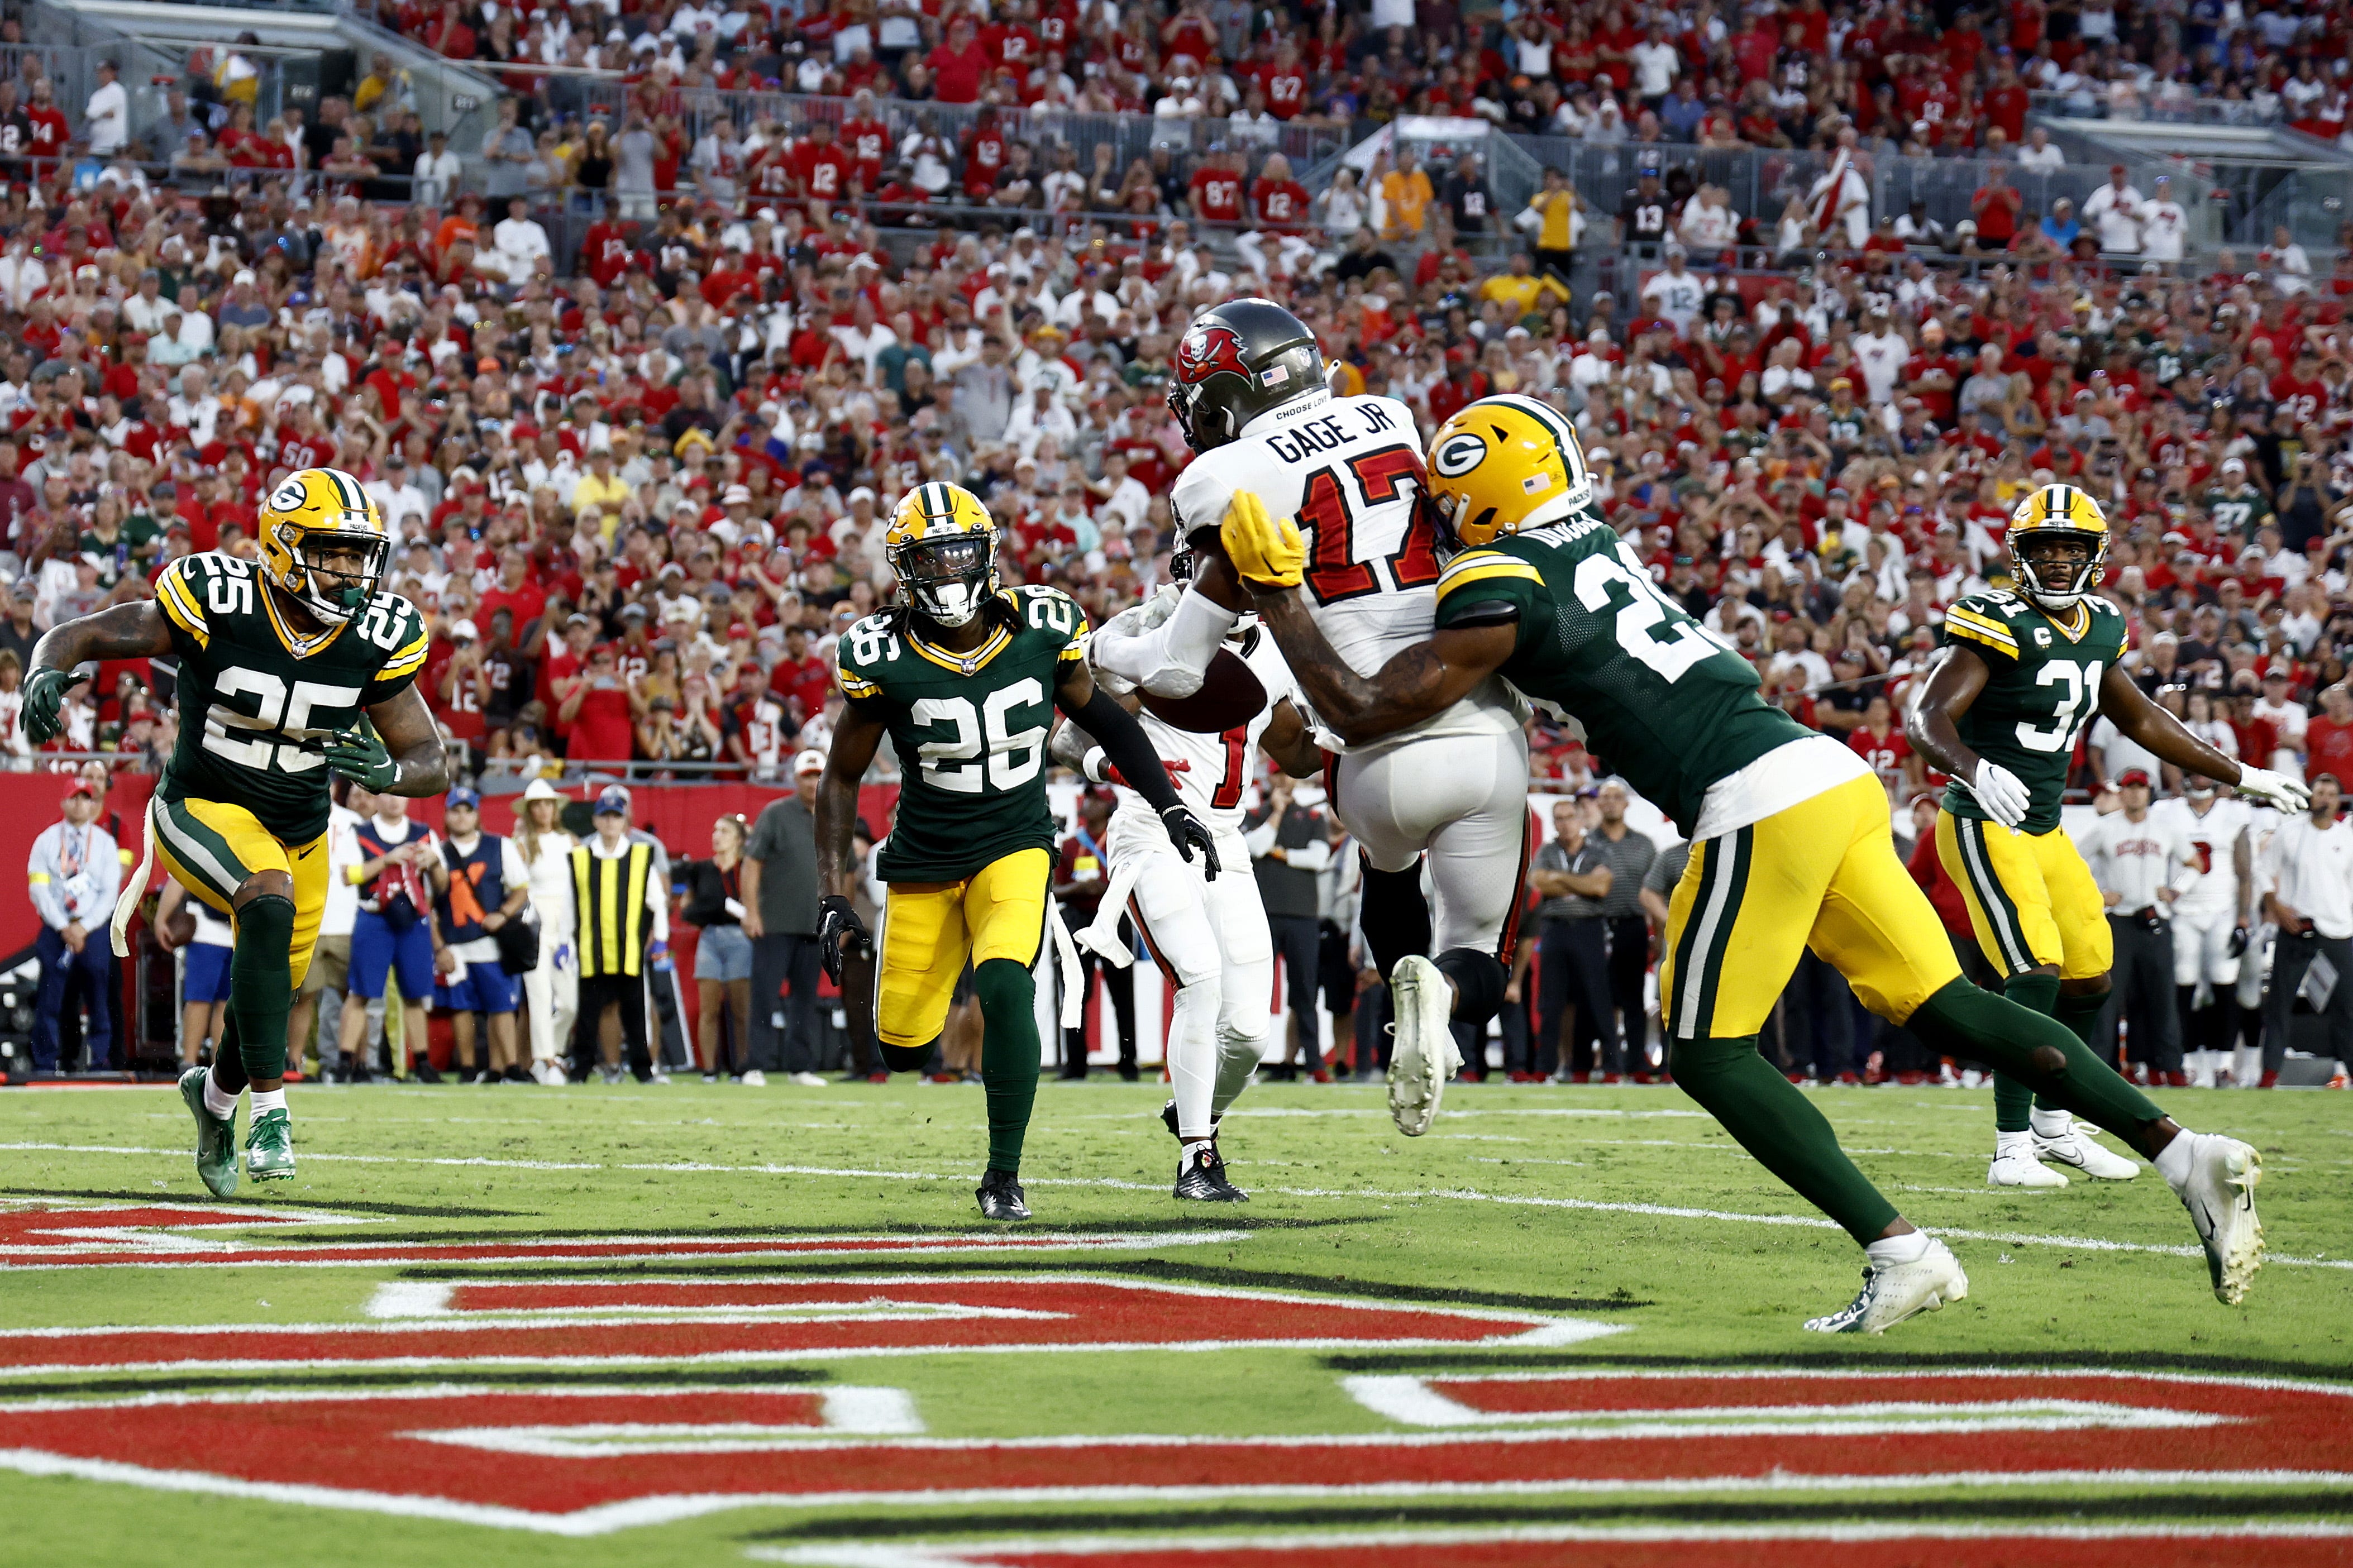 Russell Gage of the Tampa Bay Buccaneers scores a touchdown late in the fourth quarter against the Green Bay Packers on Sept. 25, 2022, at Raymond James Stadium in Tampa, Florida.